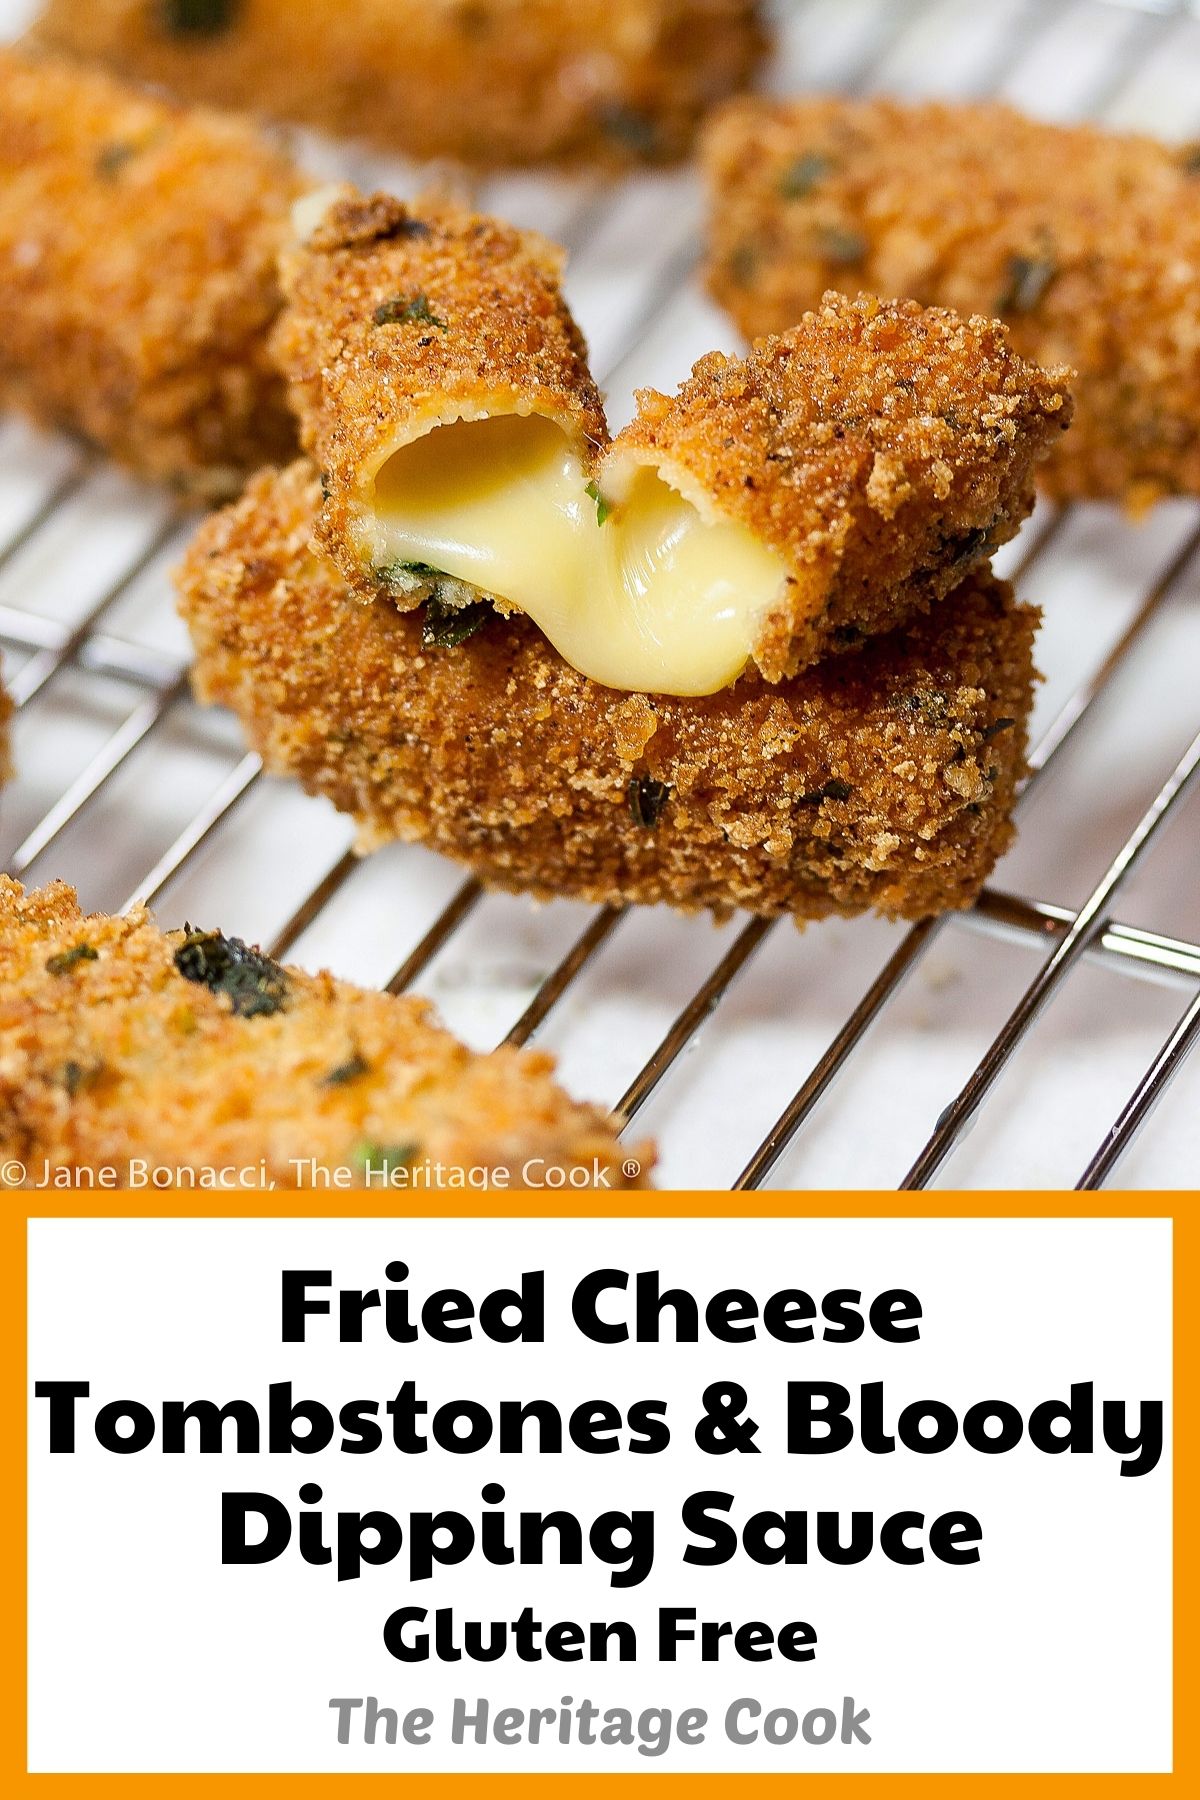 Sticks of cheese, breaded in gluten-free breading and fried golden brown, served with deep red marinara sauce; Fried Cheese Tombstones with Blood Red Dipping Sauce © 2022 Jane Bonacci, The Heritage Cook.